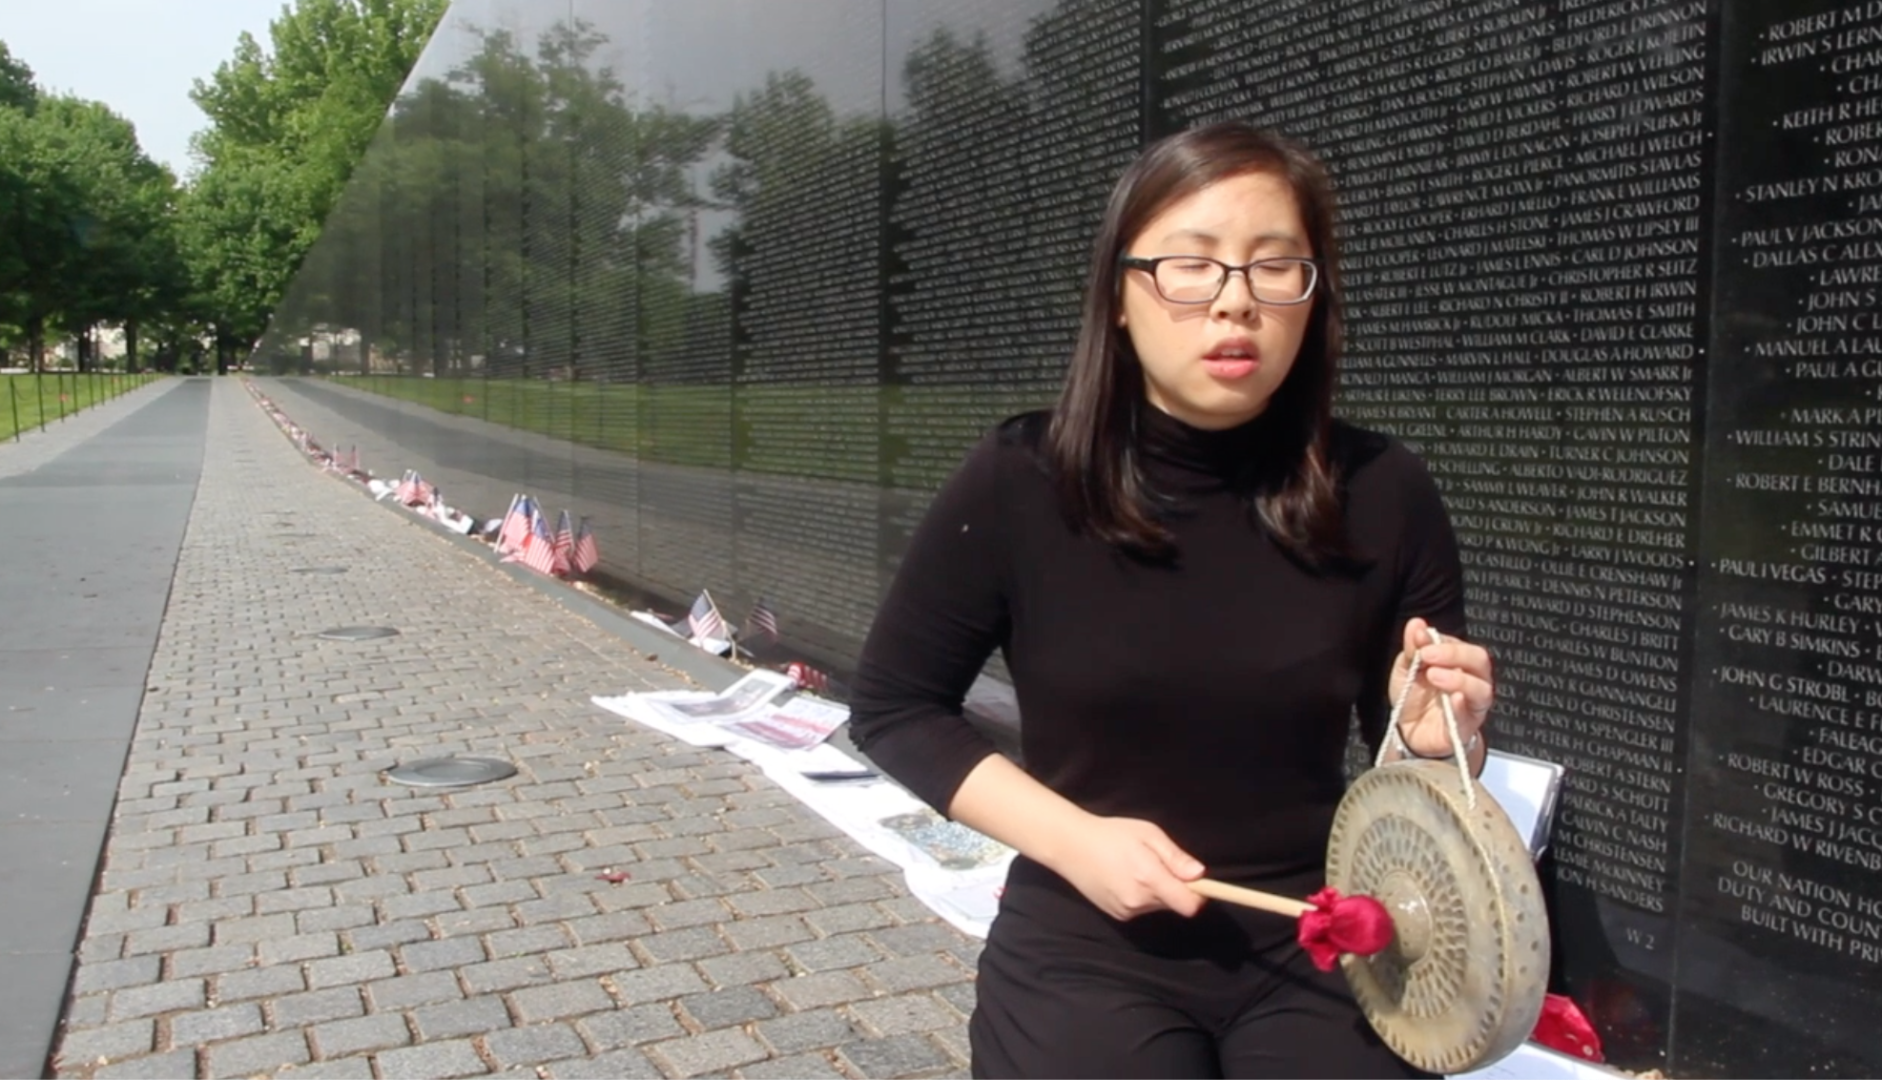 Missing Piece Project  An Intervention at the Vietnam Memorial by the  Southeast Asian Refugee Community